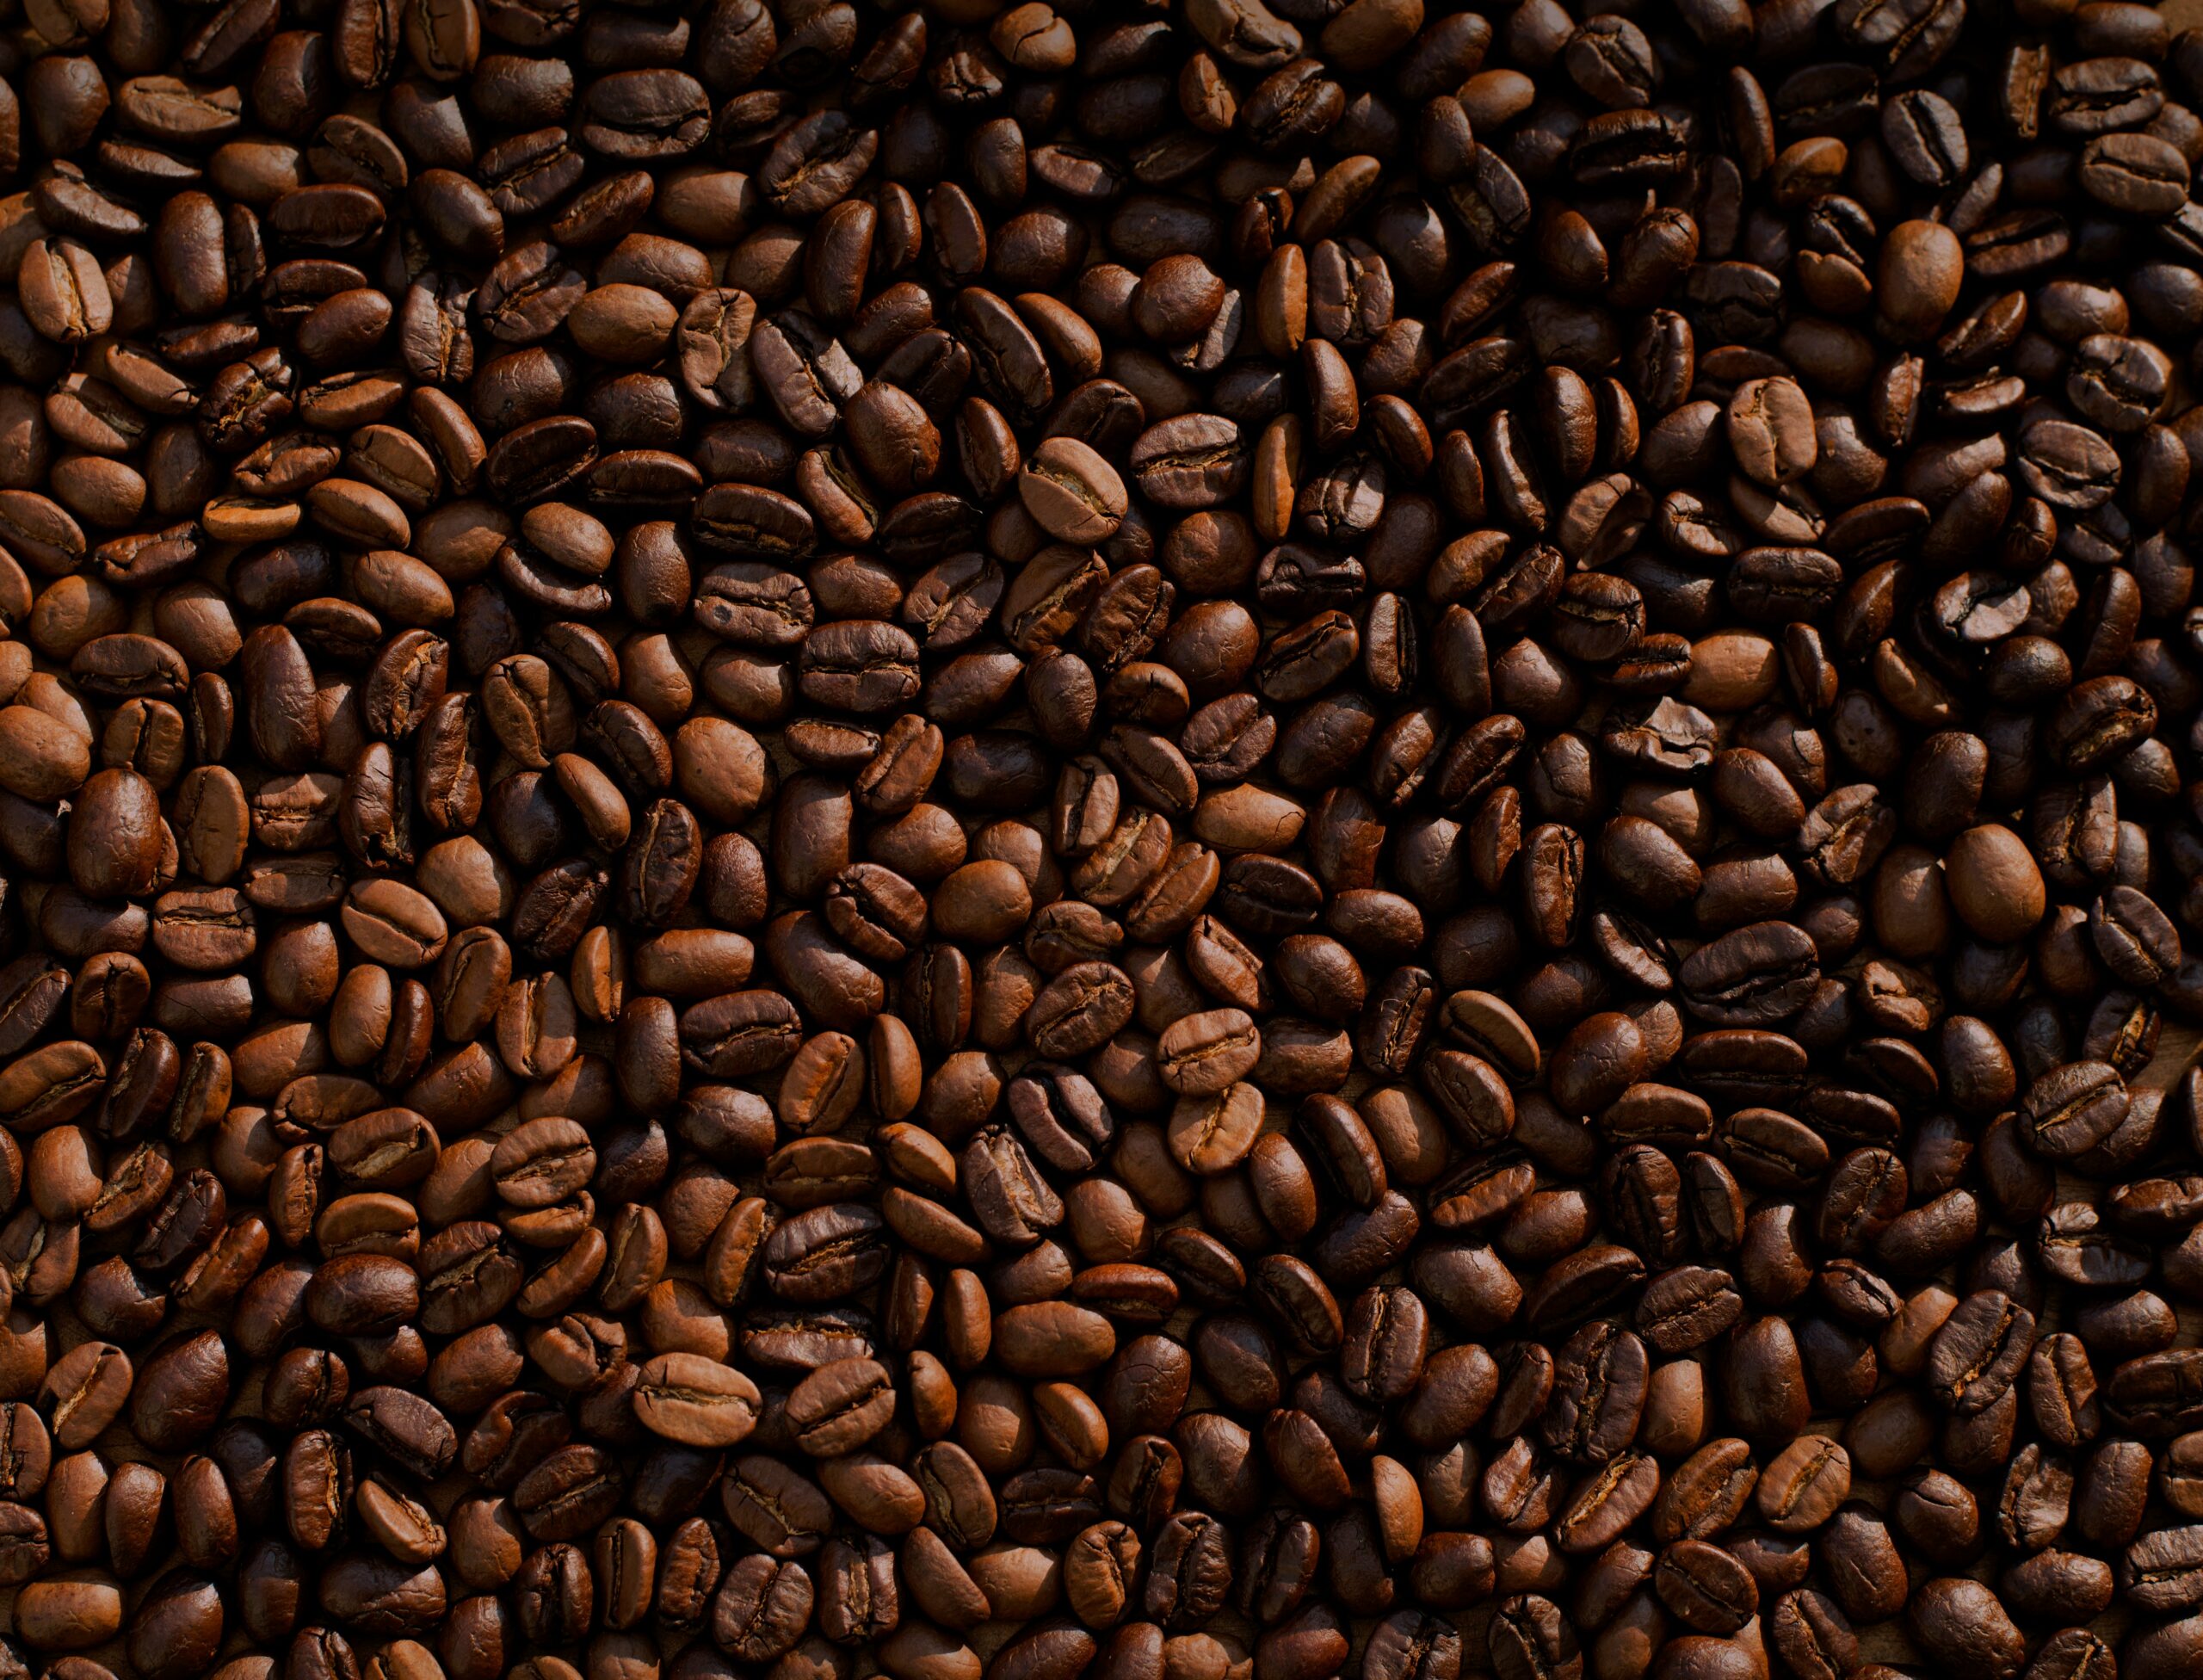 Mushroom coffee has a lot of health benefits and is a great alternative to regular coffee. Pictured: coffee beans